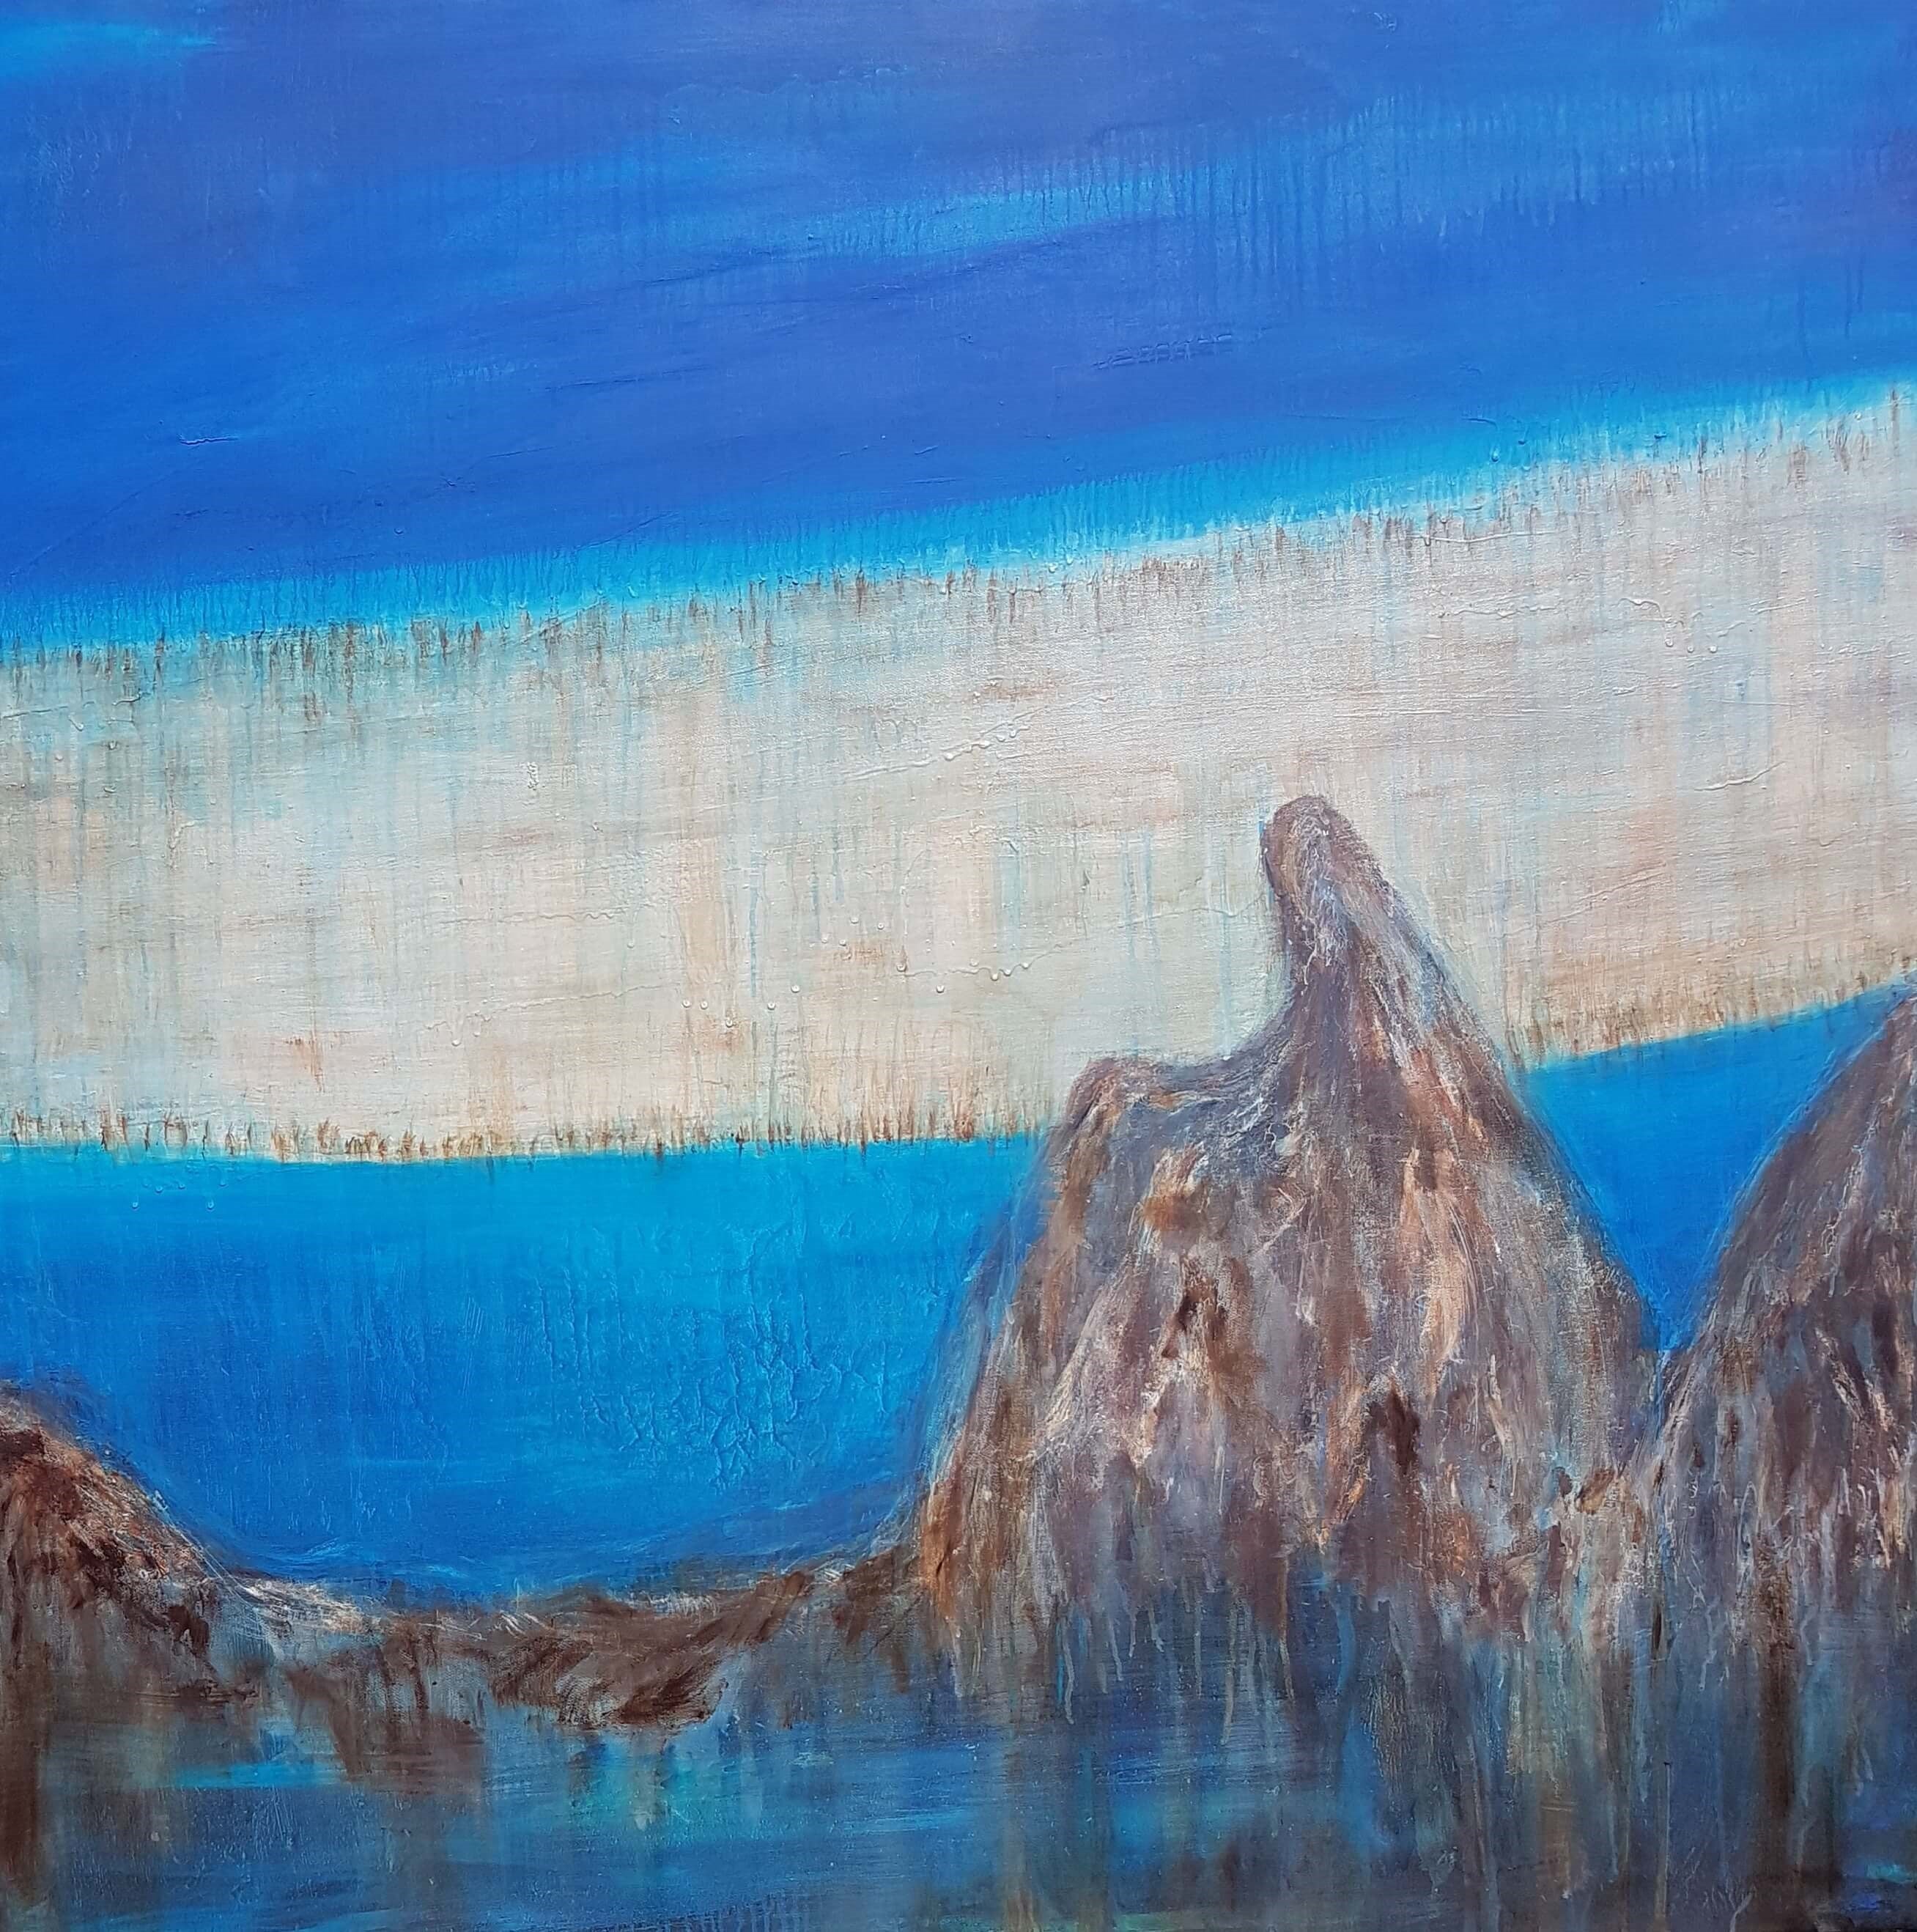 The Passage. Triptych. Oil on canvas. Landscape painting of Bribie Island, Glasshouse Mountains and Pumicestone Passage, connected.  Original art collection, oil painting, female artist, Moreton Bay Region, Australian art,  Australian artist, abstract and figurative art. Queensland, Australia.